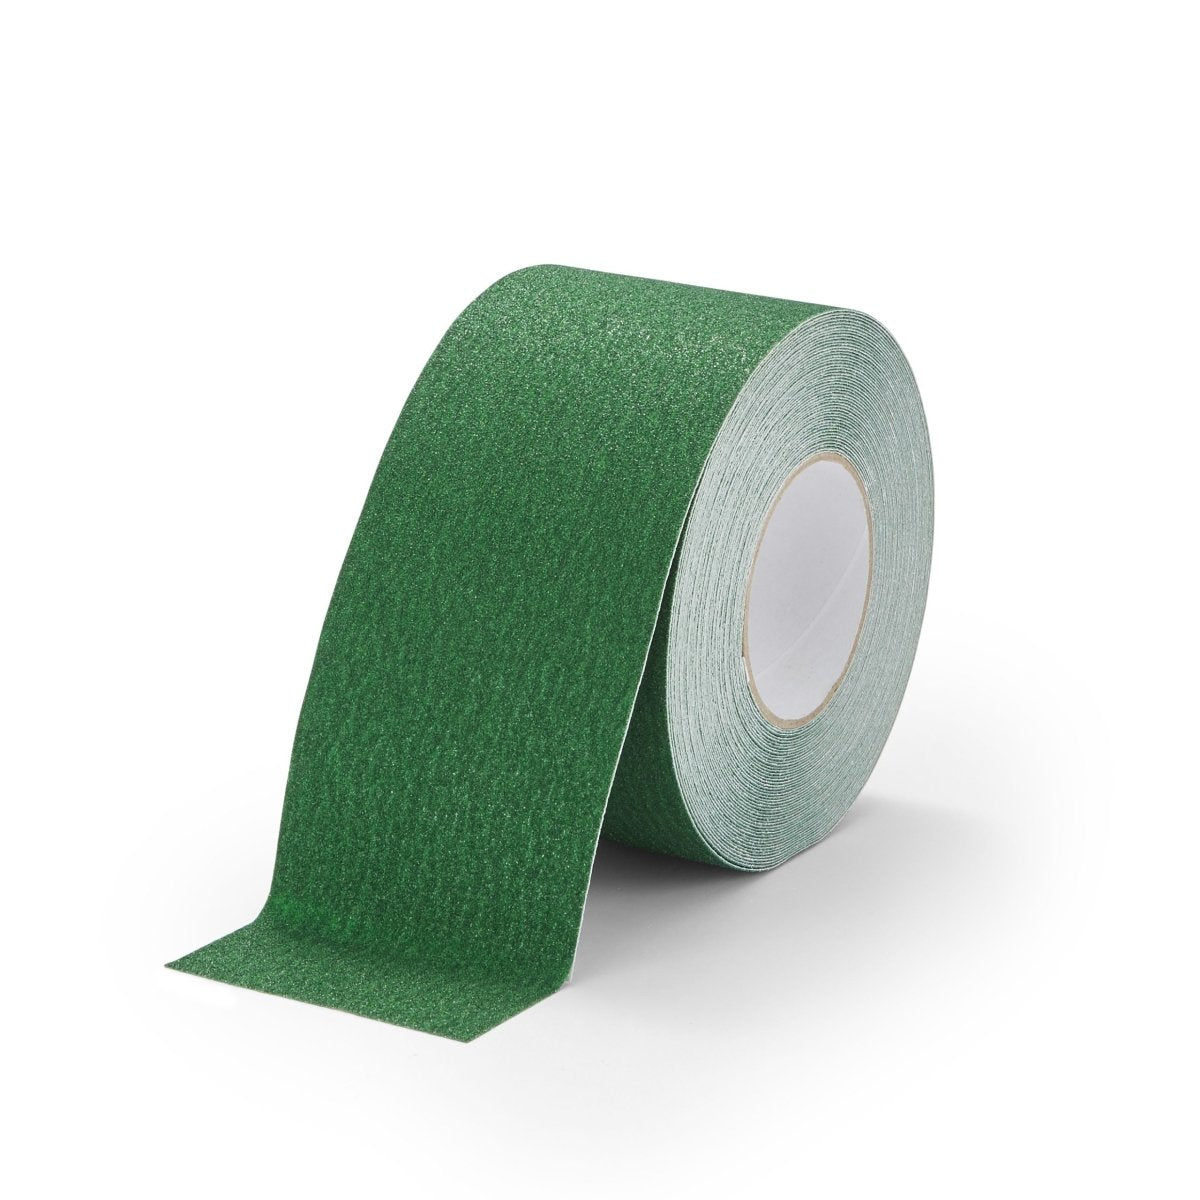 Extra Course Grade Anti Slip Tape Rolls 18m - Slips Away - H3402V Safety-Grip EXTRA Coarse - Green-Green-100mm-1-1-2 -